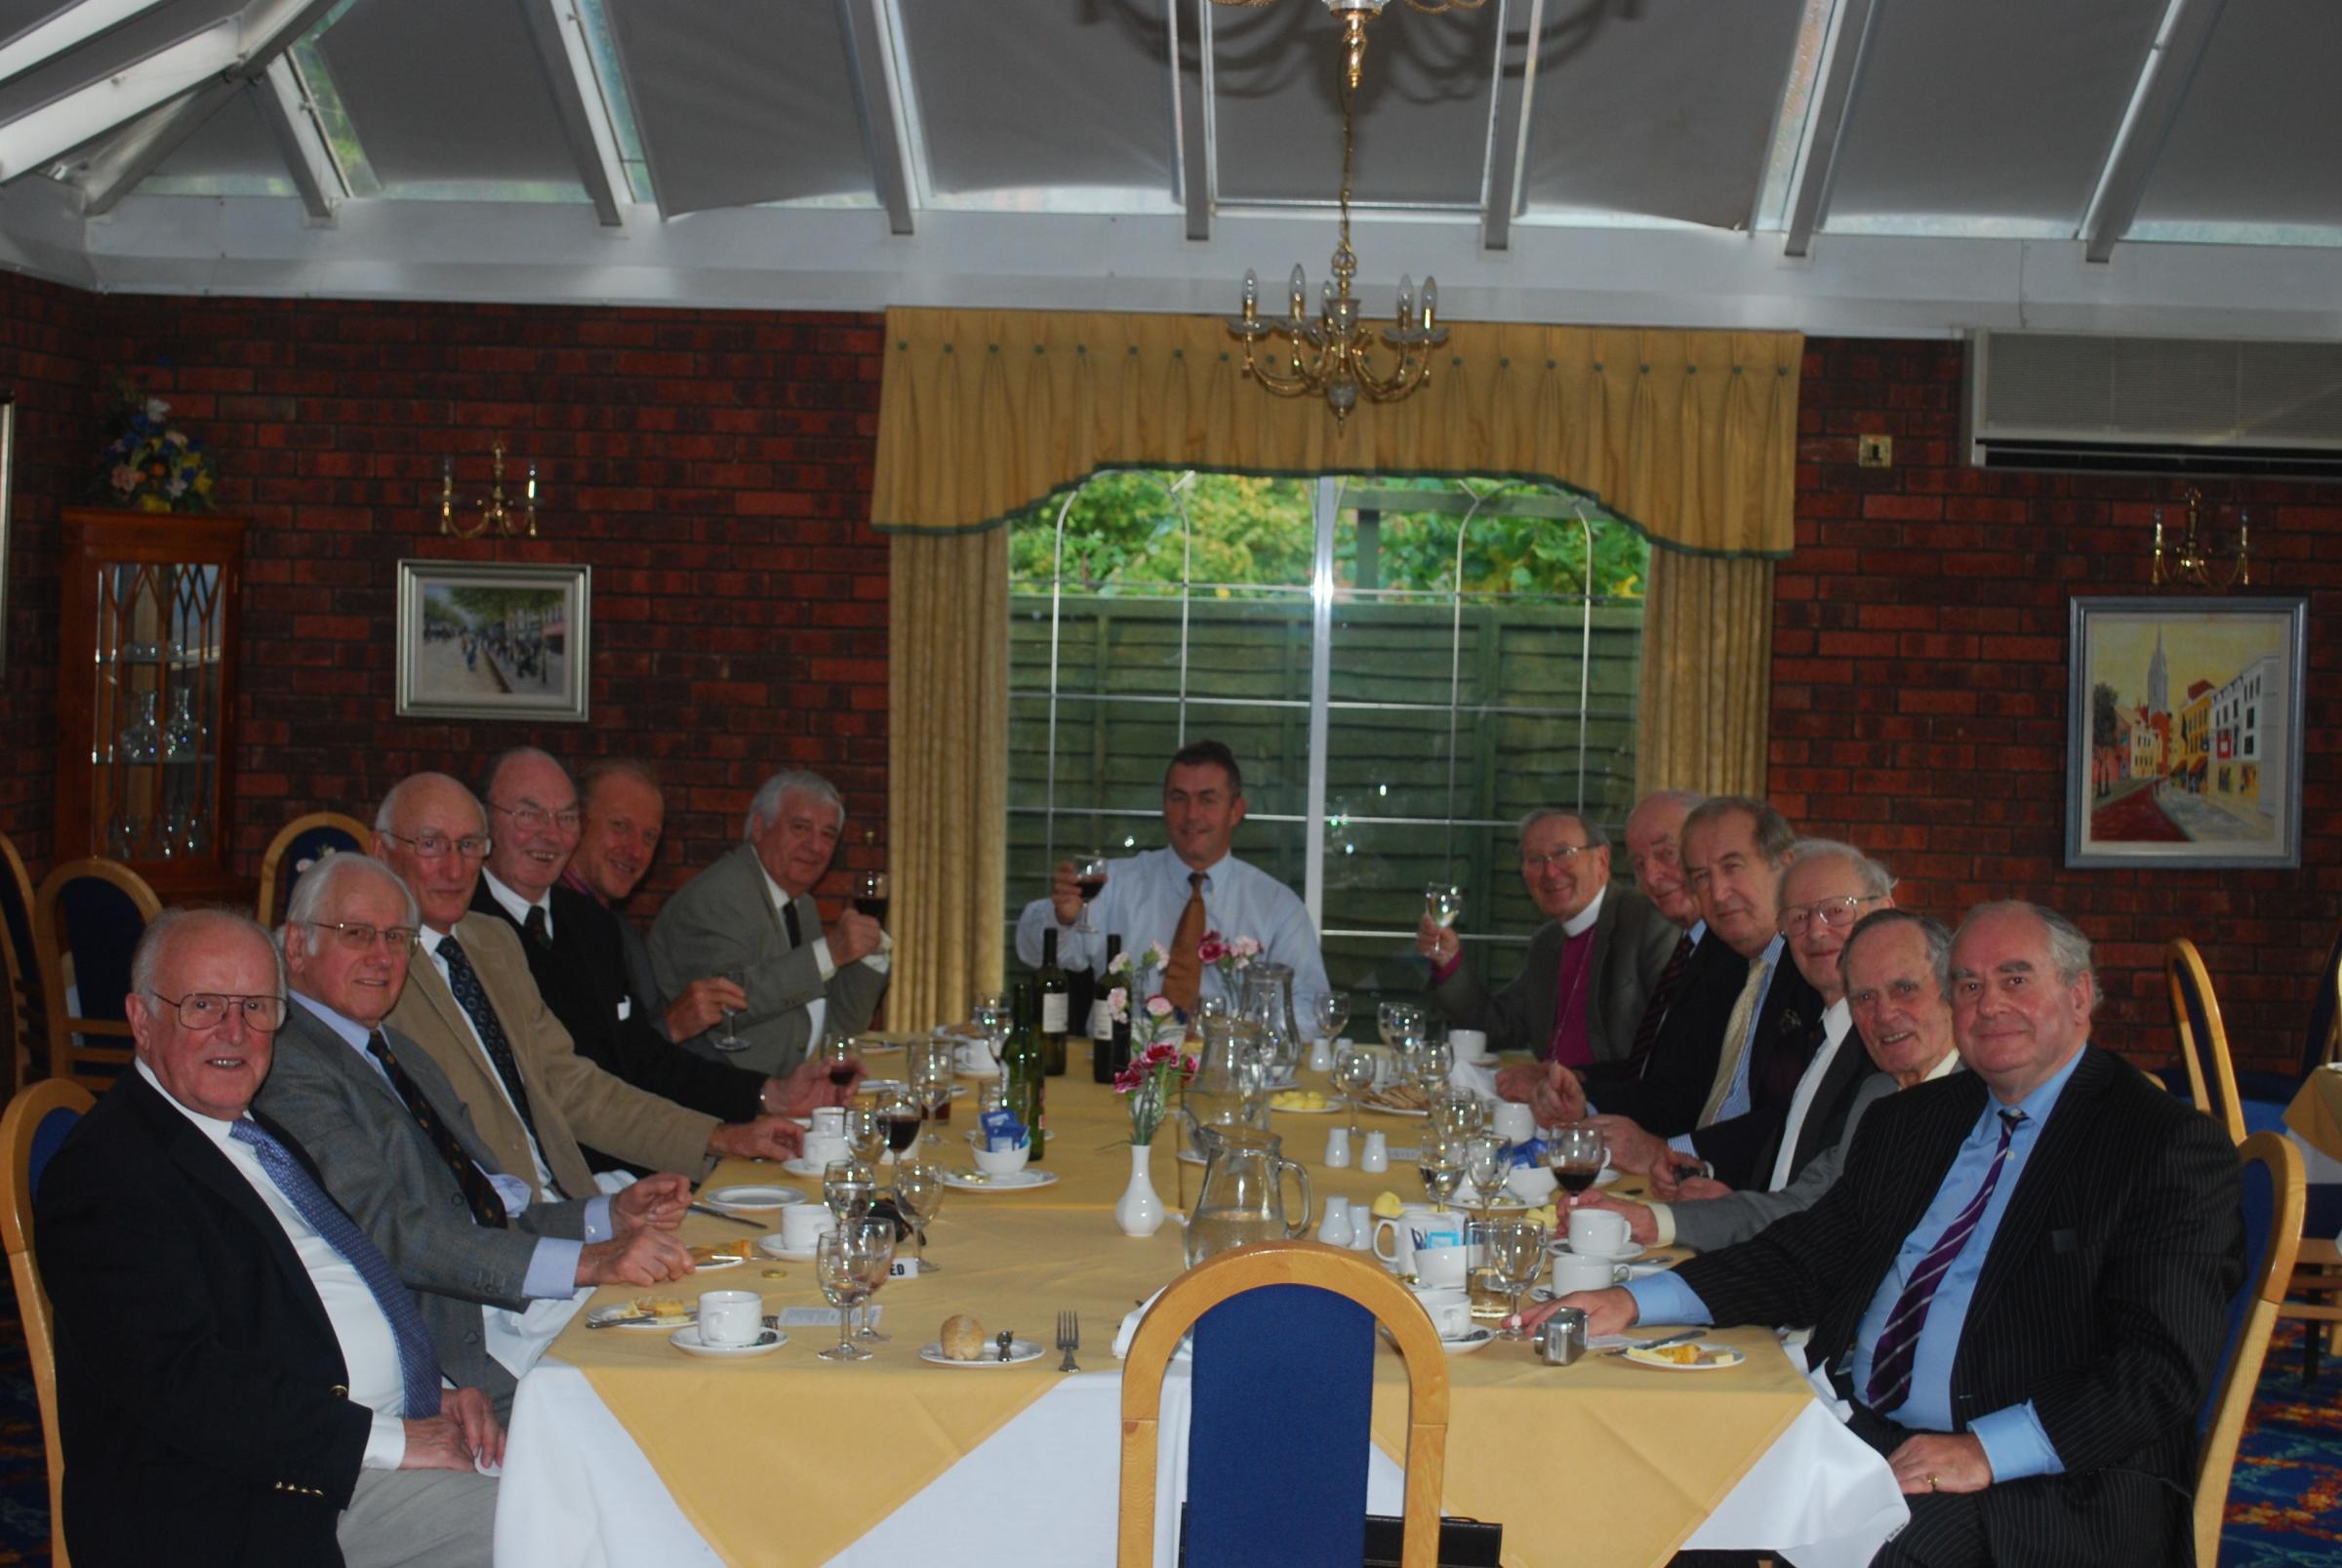 John with the Chairman and Vice Presidents in 2012 